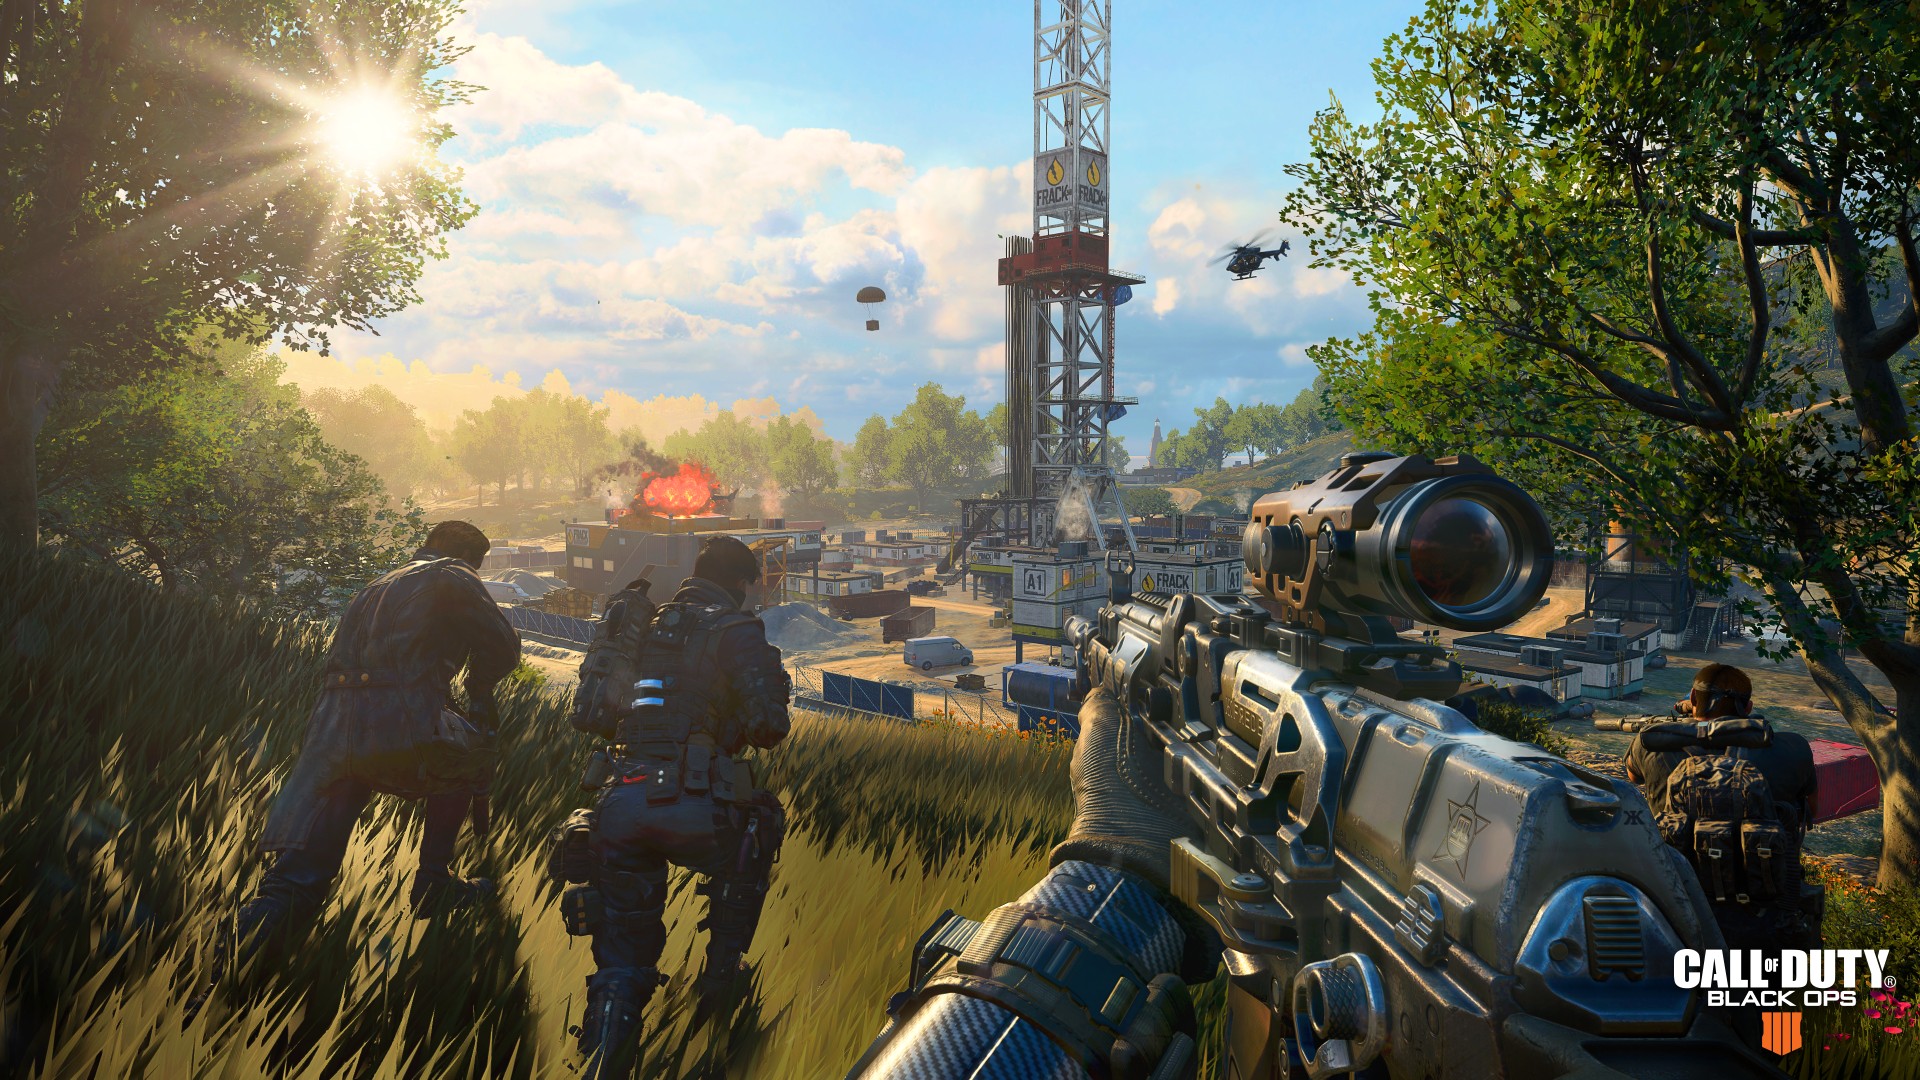 Call of Duty: Black Ops 4 Blackout